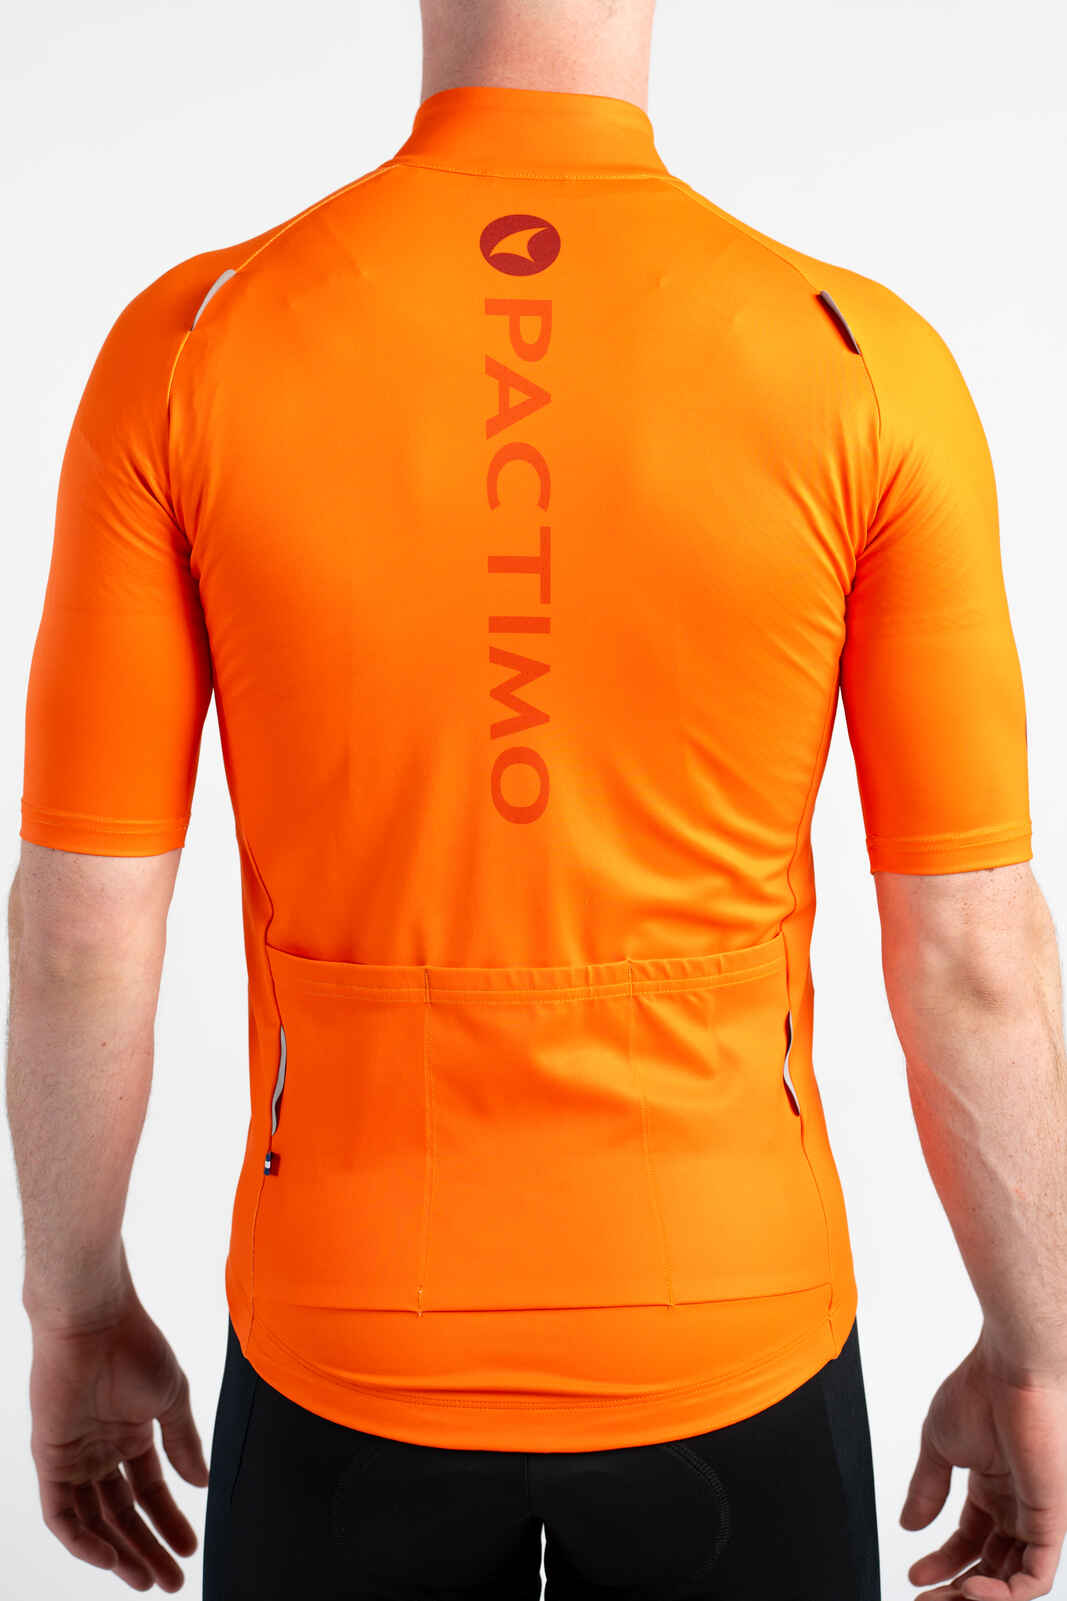 Men's Red/Orange Water Resistant Cycling Jersey - Back Pockets